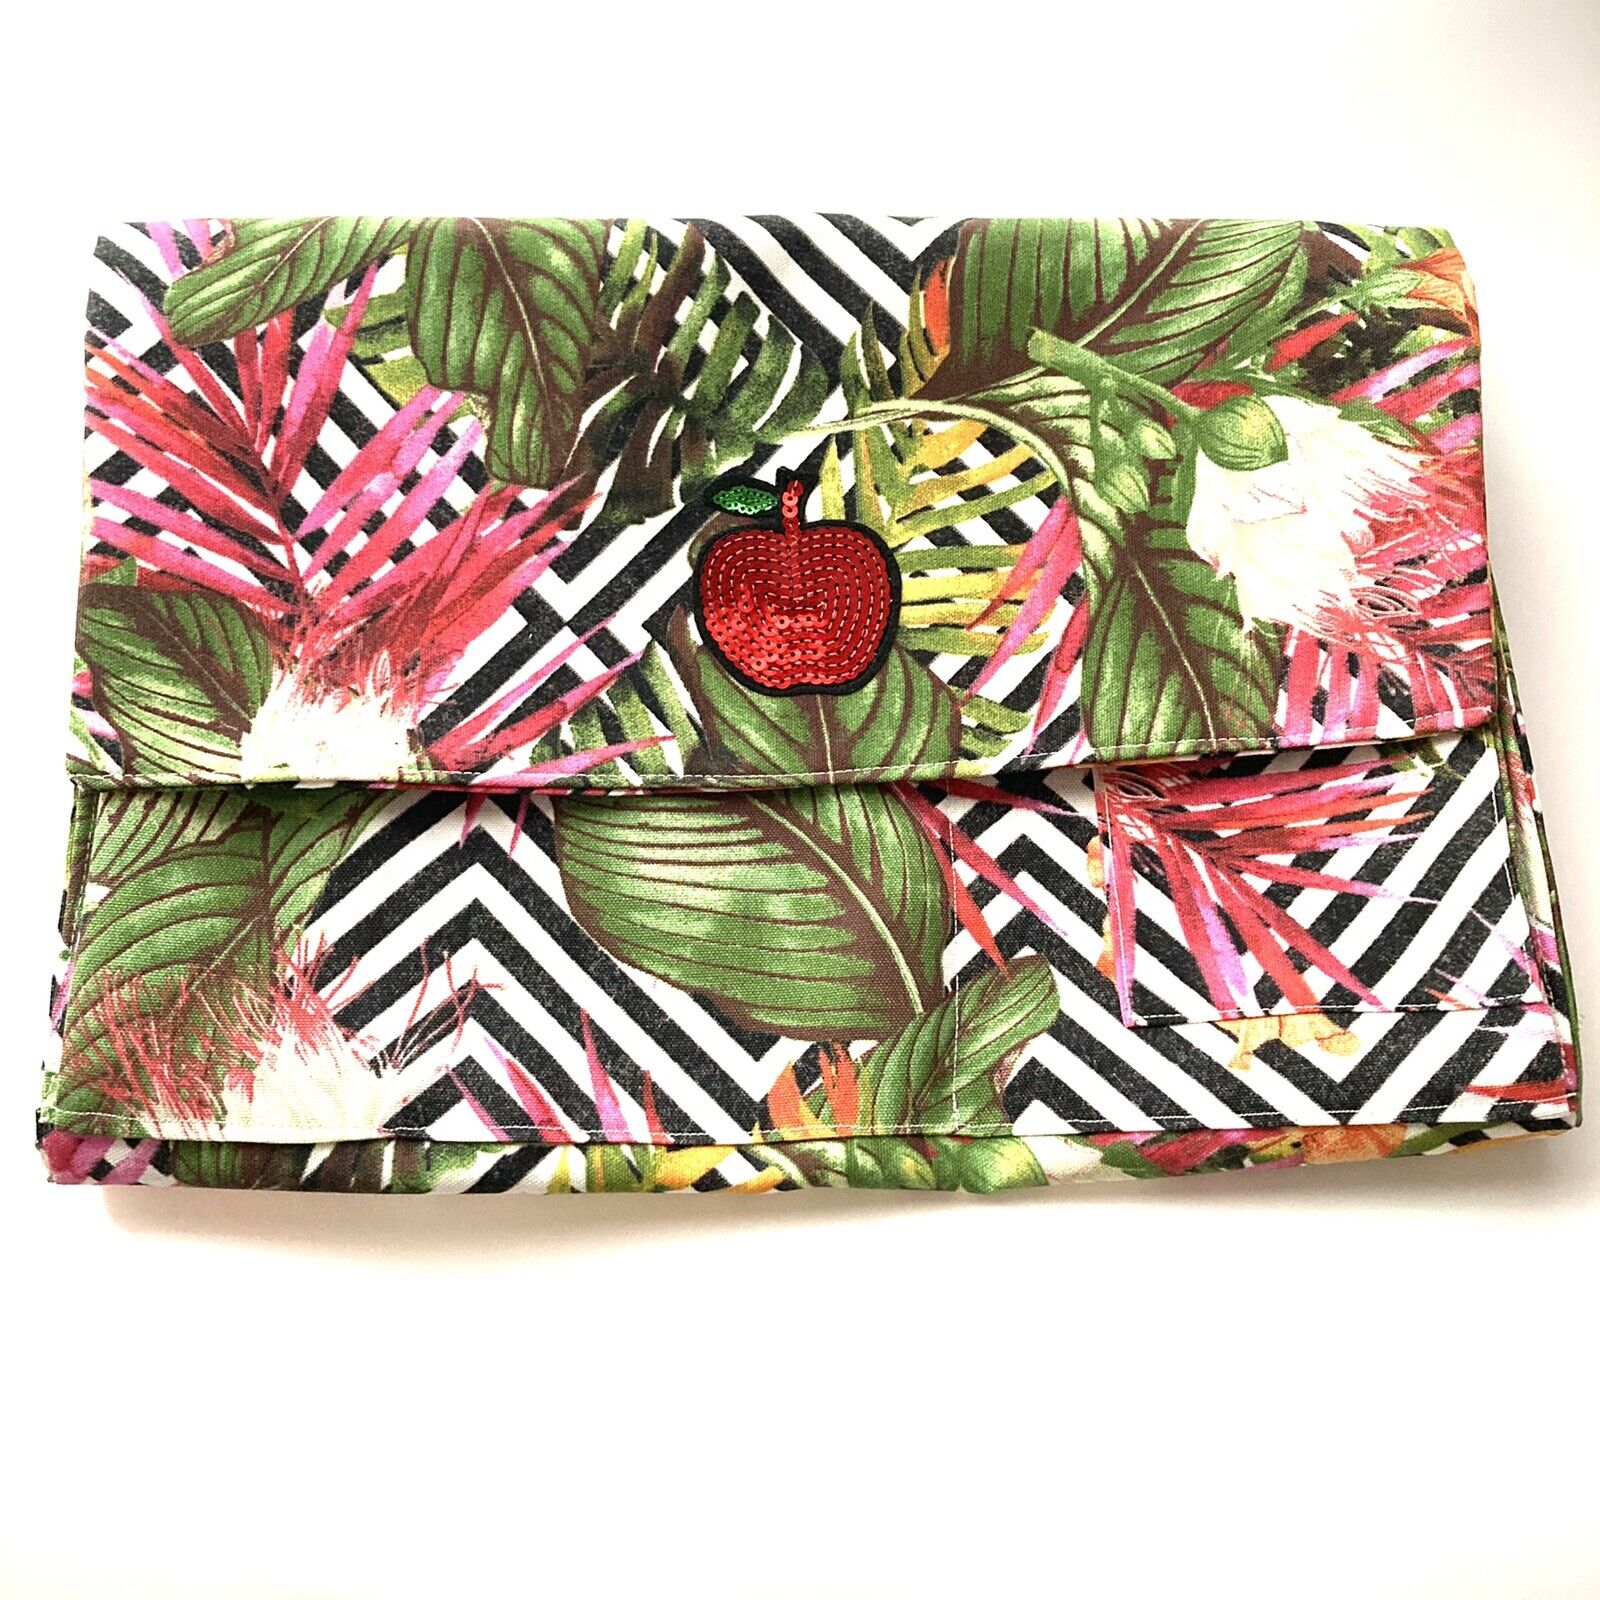 Notebook Case 17” Laptop Flowers Pink Apple Pockets Amazing Quality Cushioned